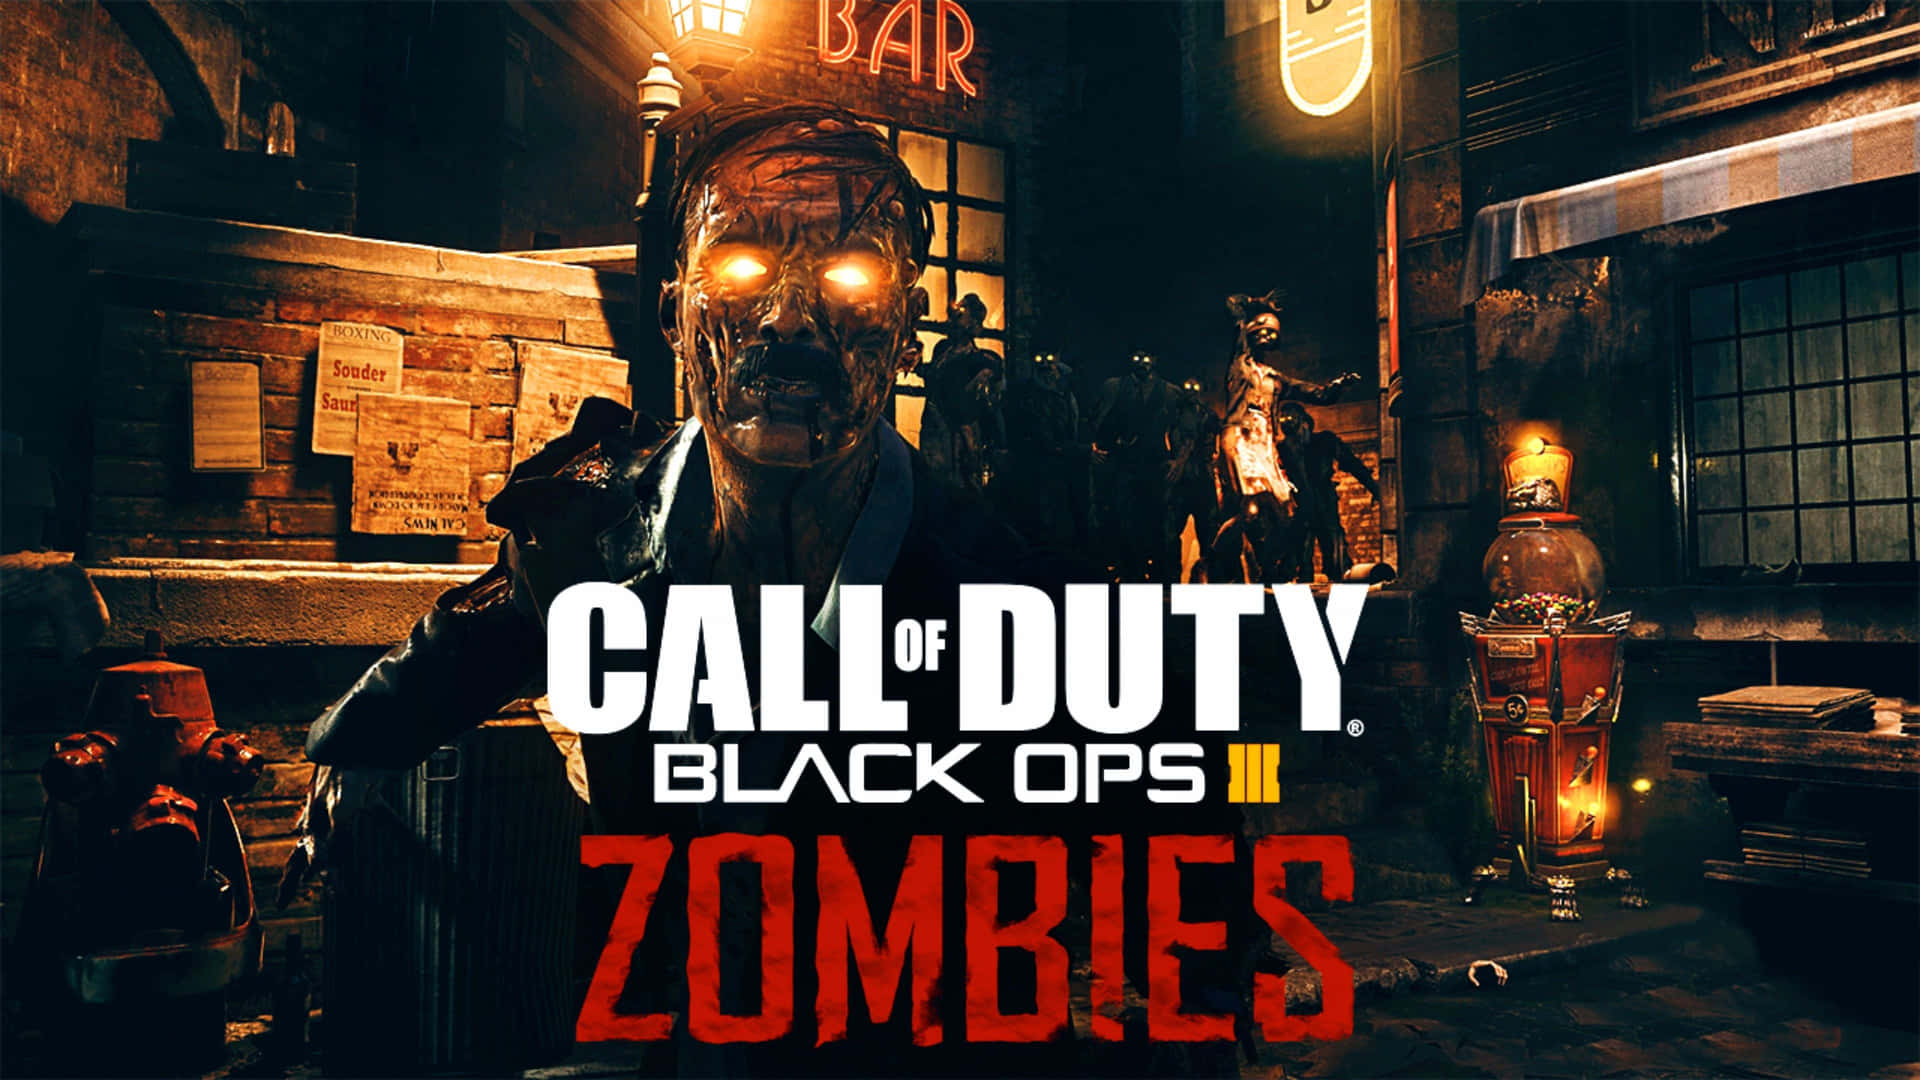 black ops zombies 5. call of duty lack ops zombies